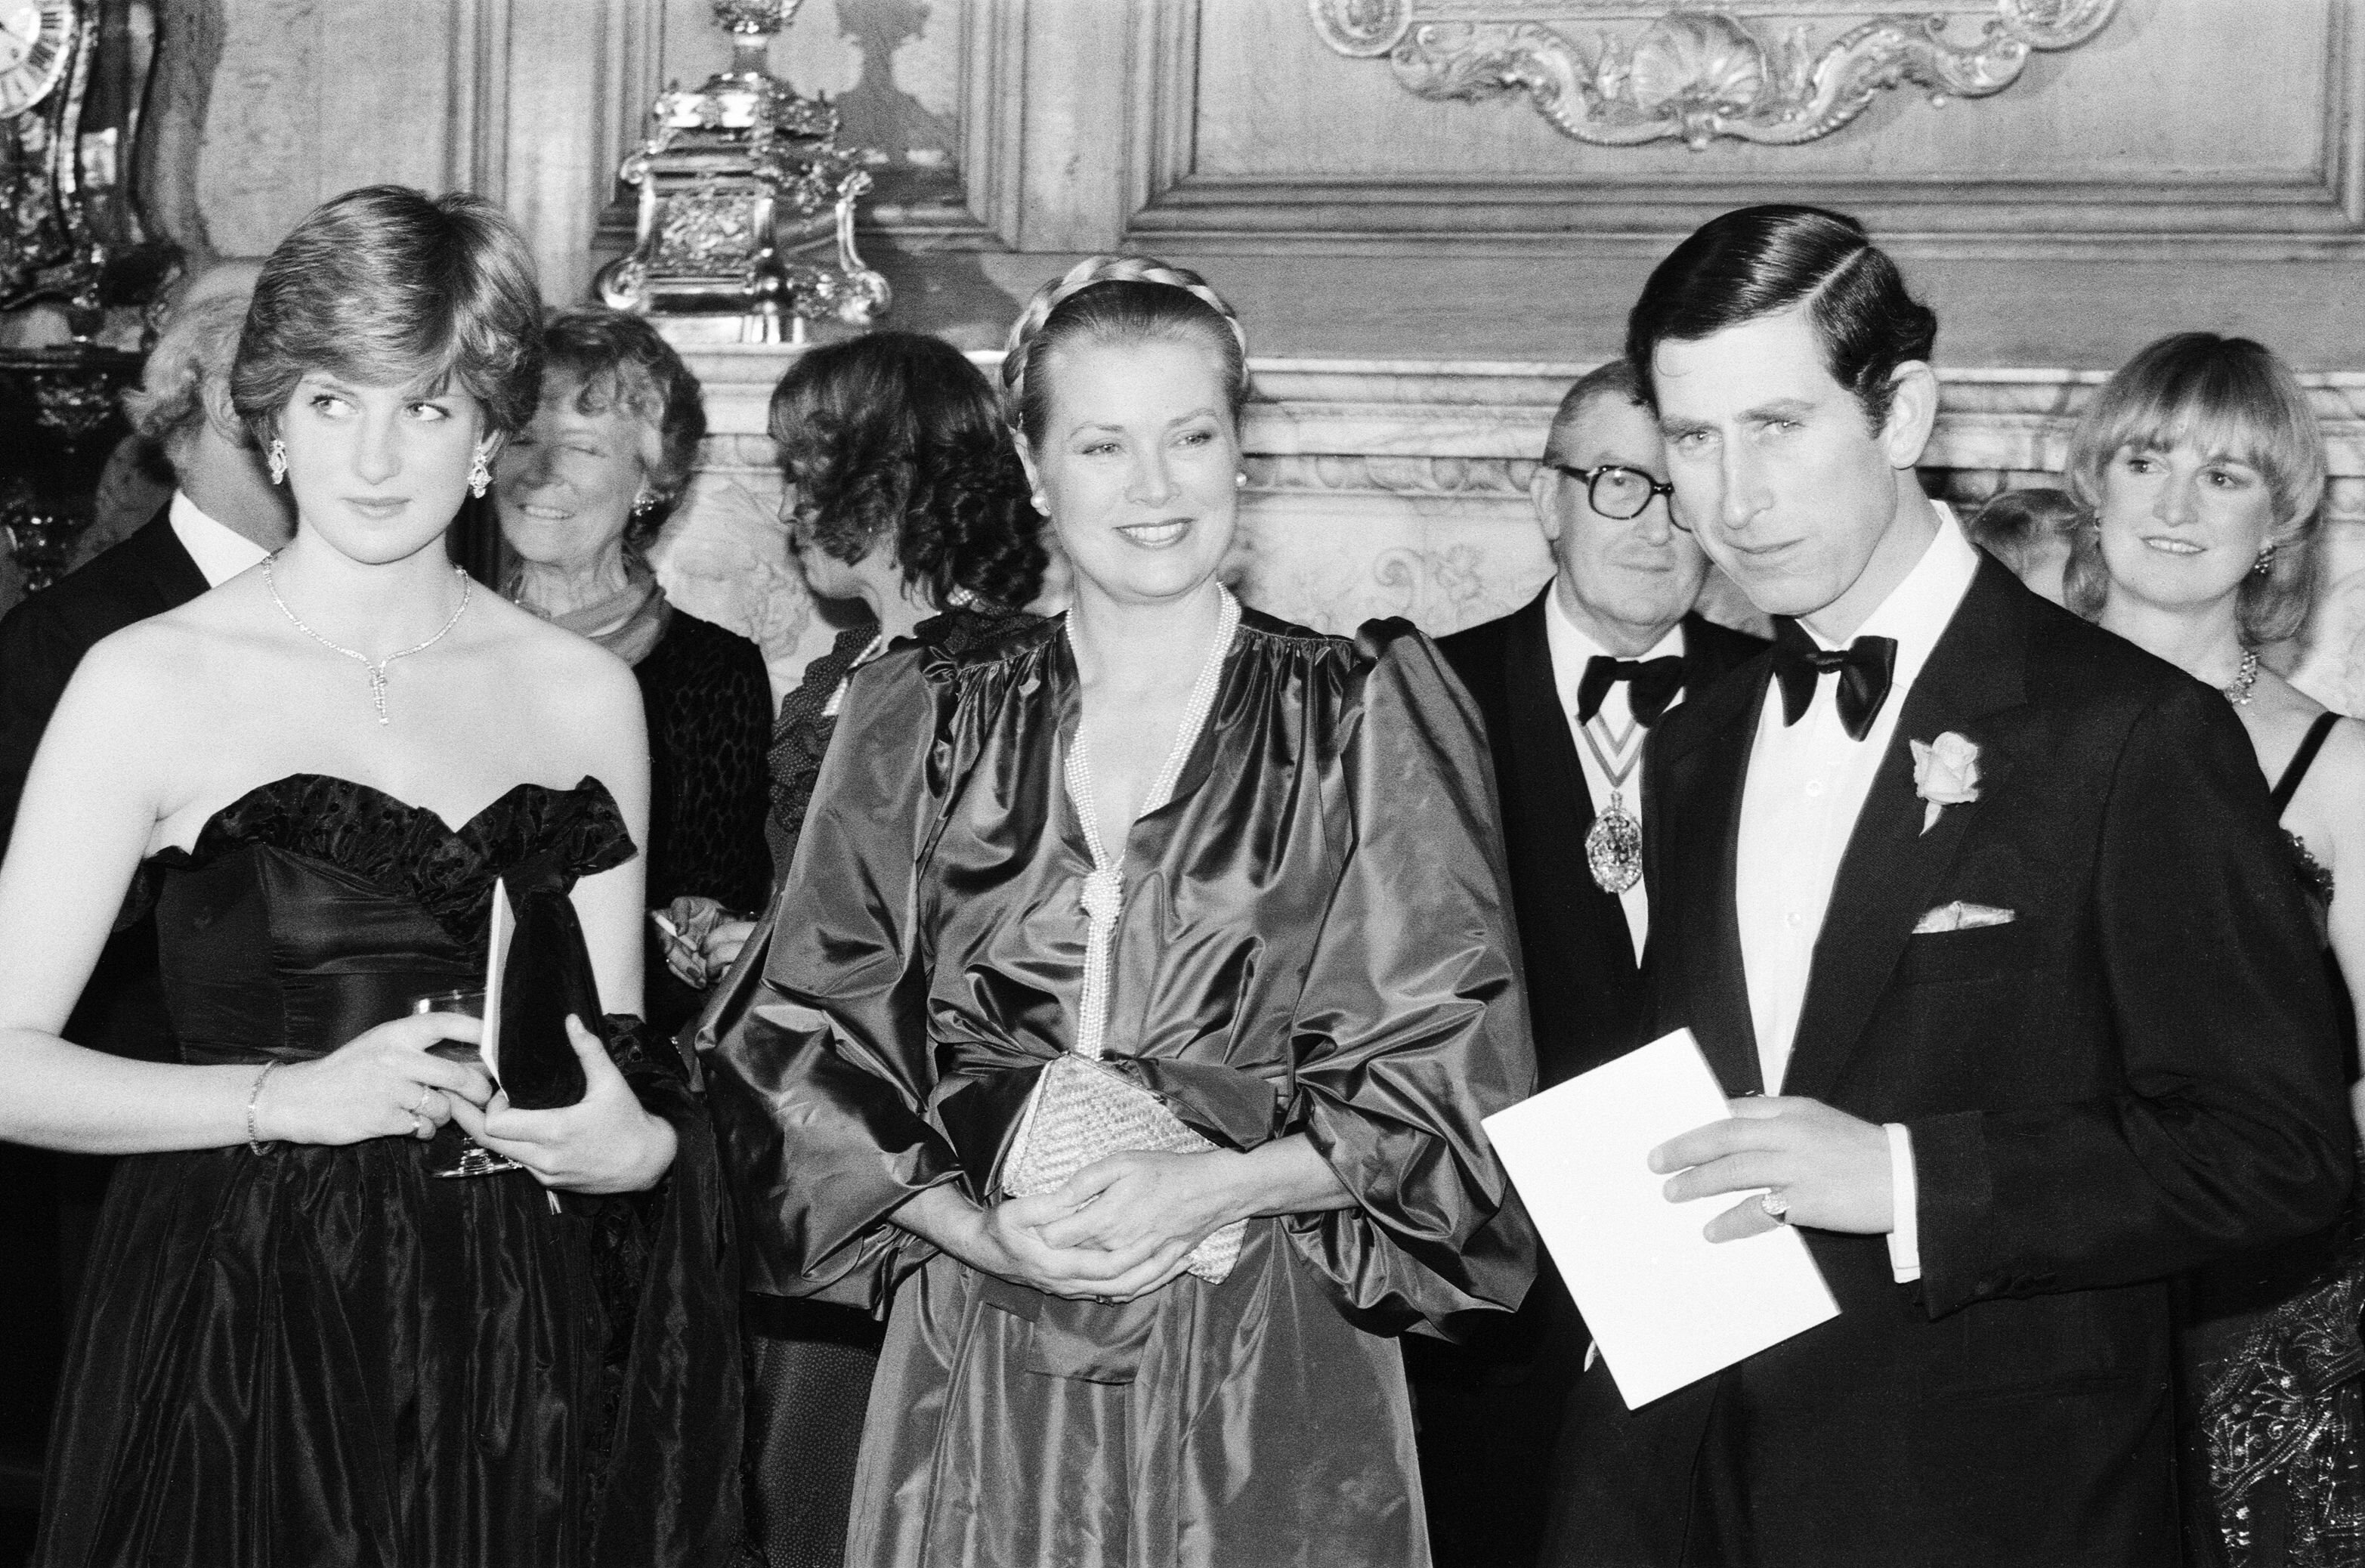 Lady Diana Spencer, Princess Grace of Monaco, and Prince Charles at a Gala Charity Concert in London on March 9, 1981. | Source: Kent Gavin/Daily Mirror/Mirrorpix/Getty Images